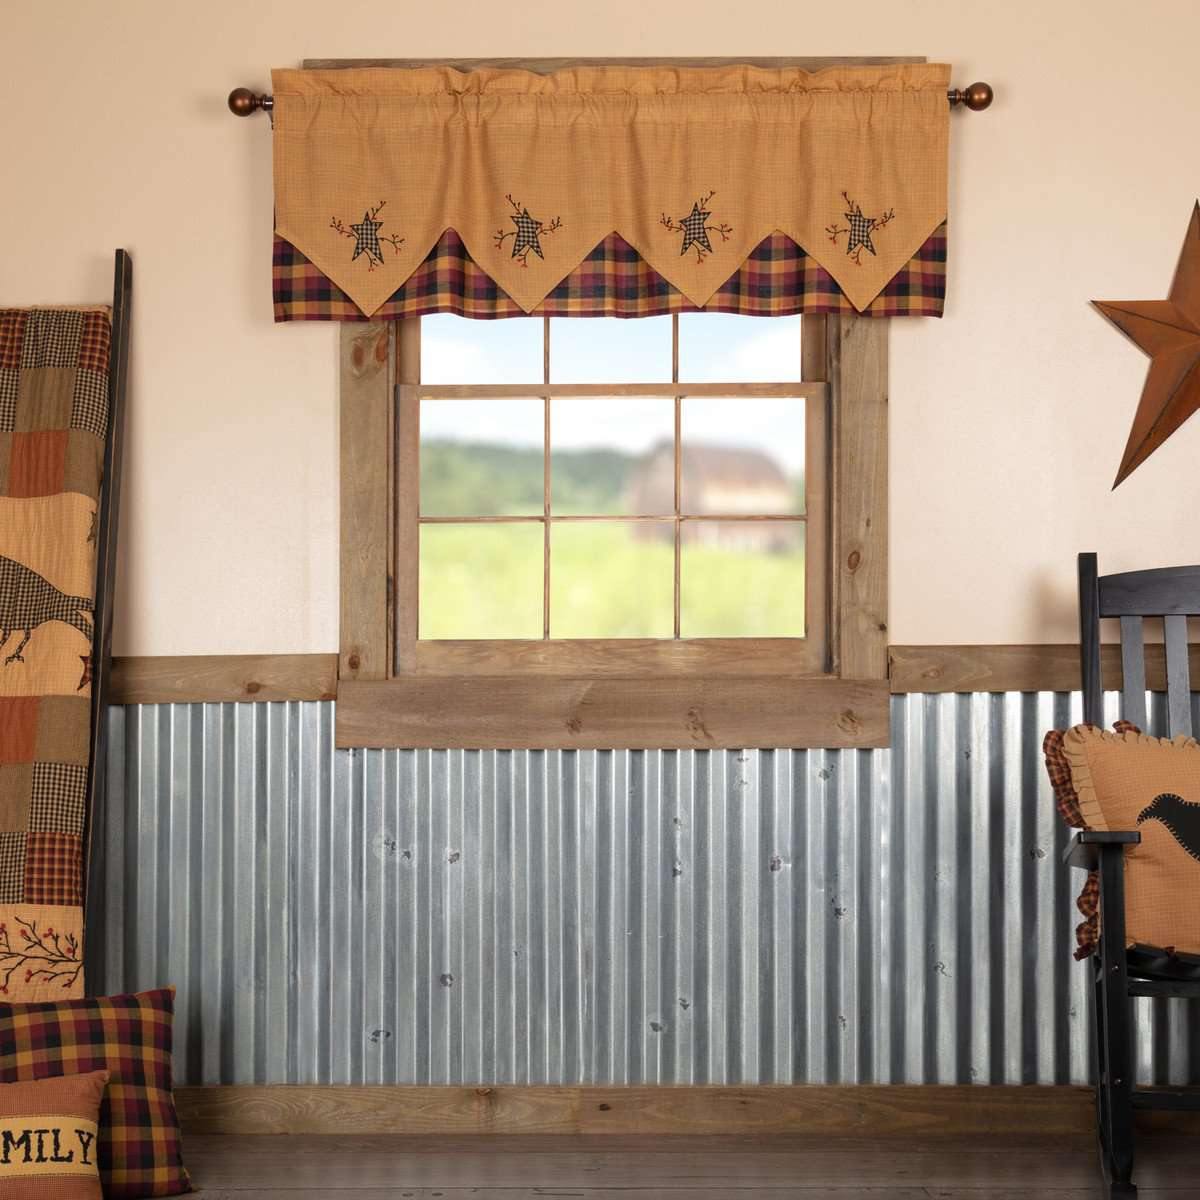 Heritage Farms Primitive Star and Pip Valance Layered Curtain 20x60 VHC Brands - The Fox Decor